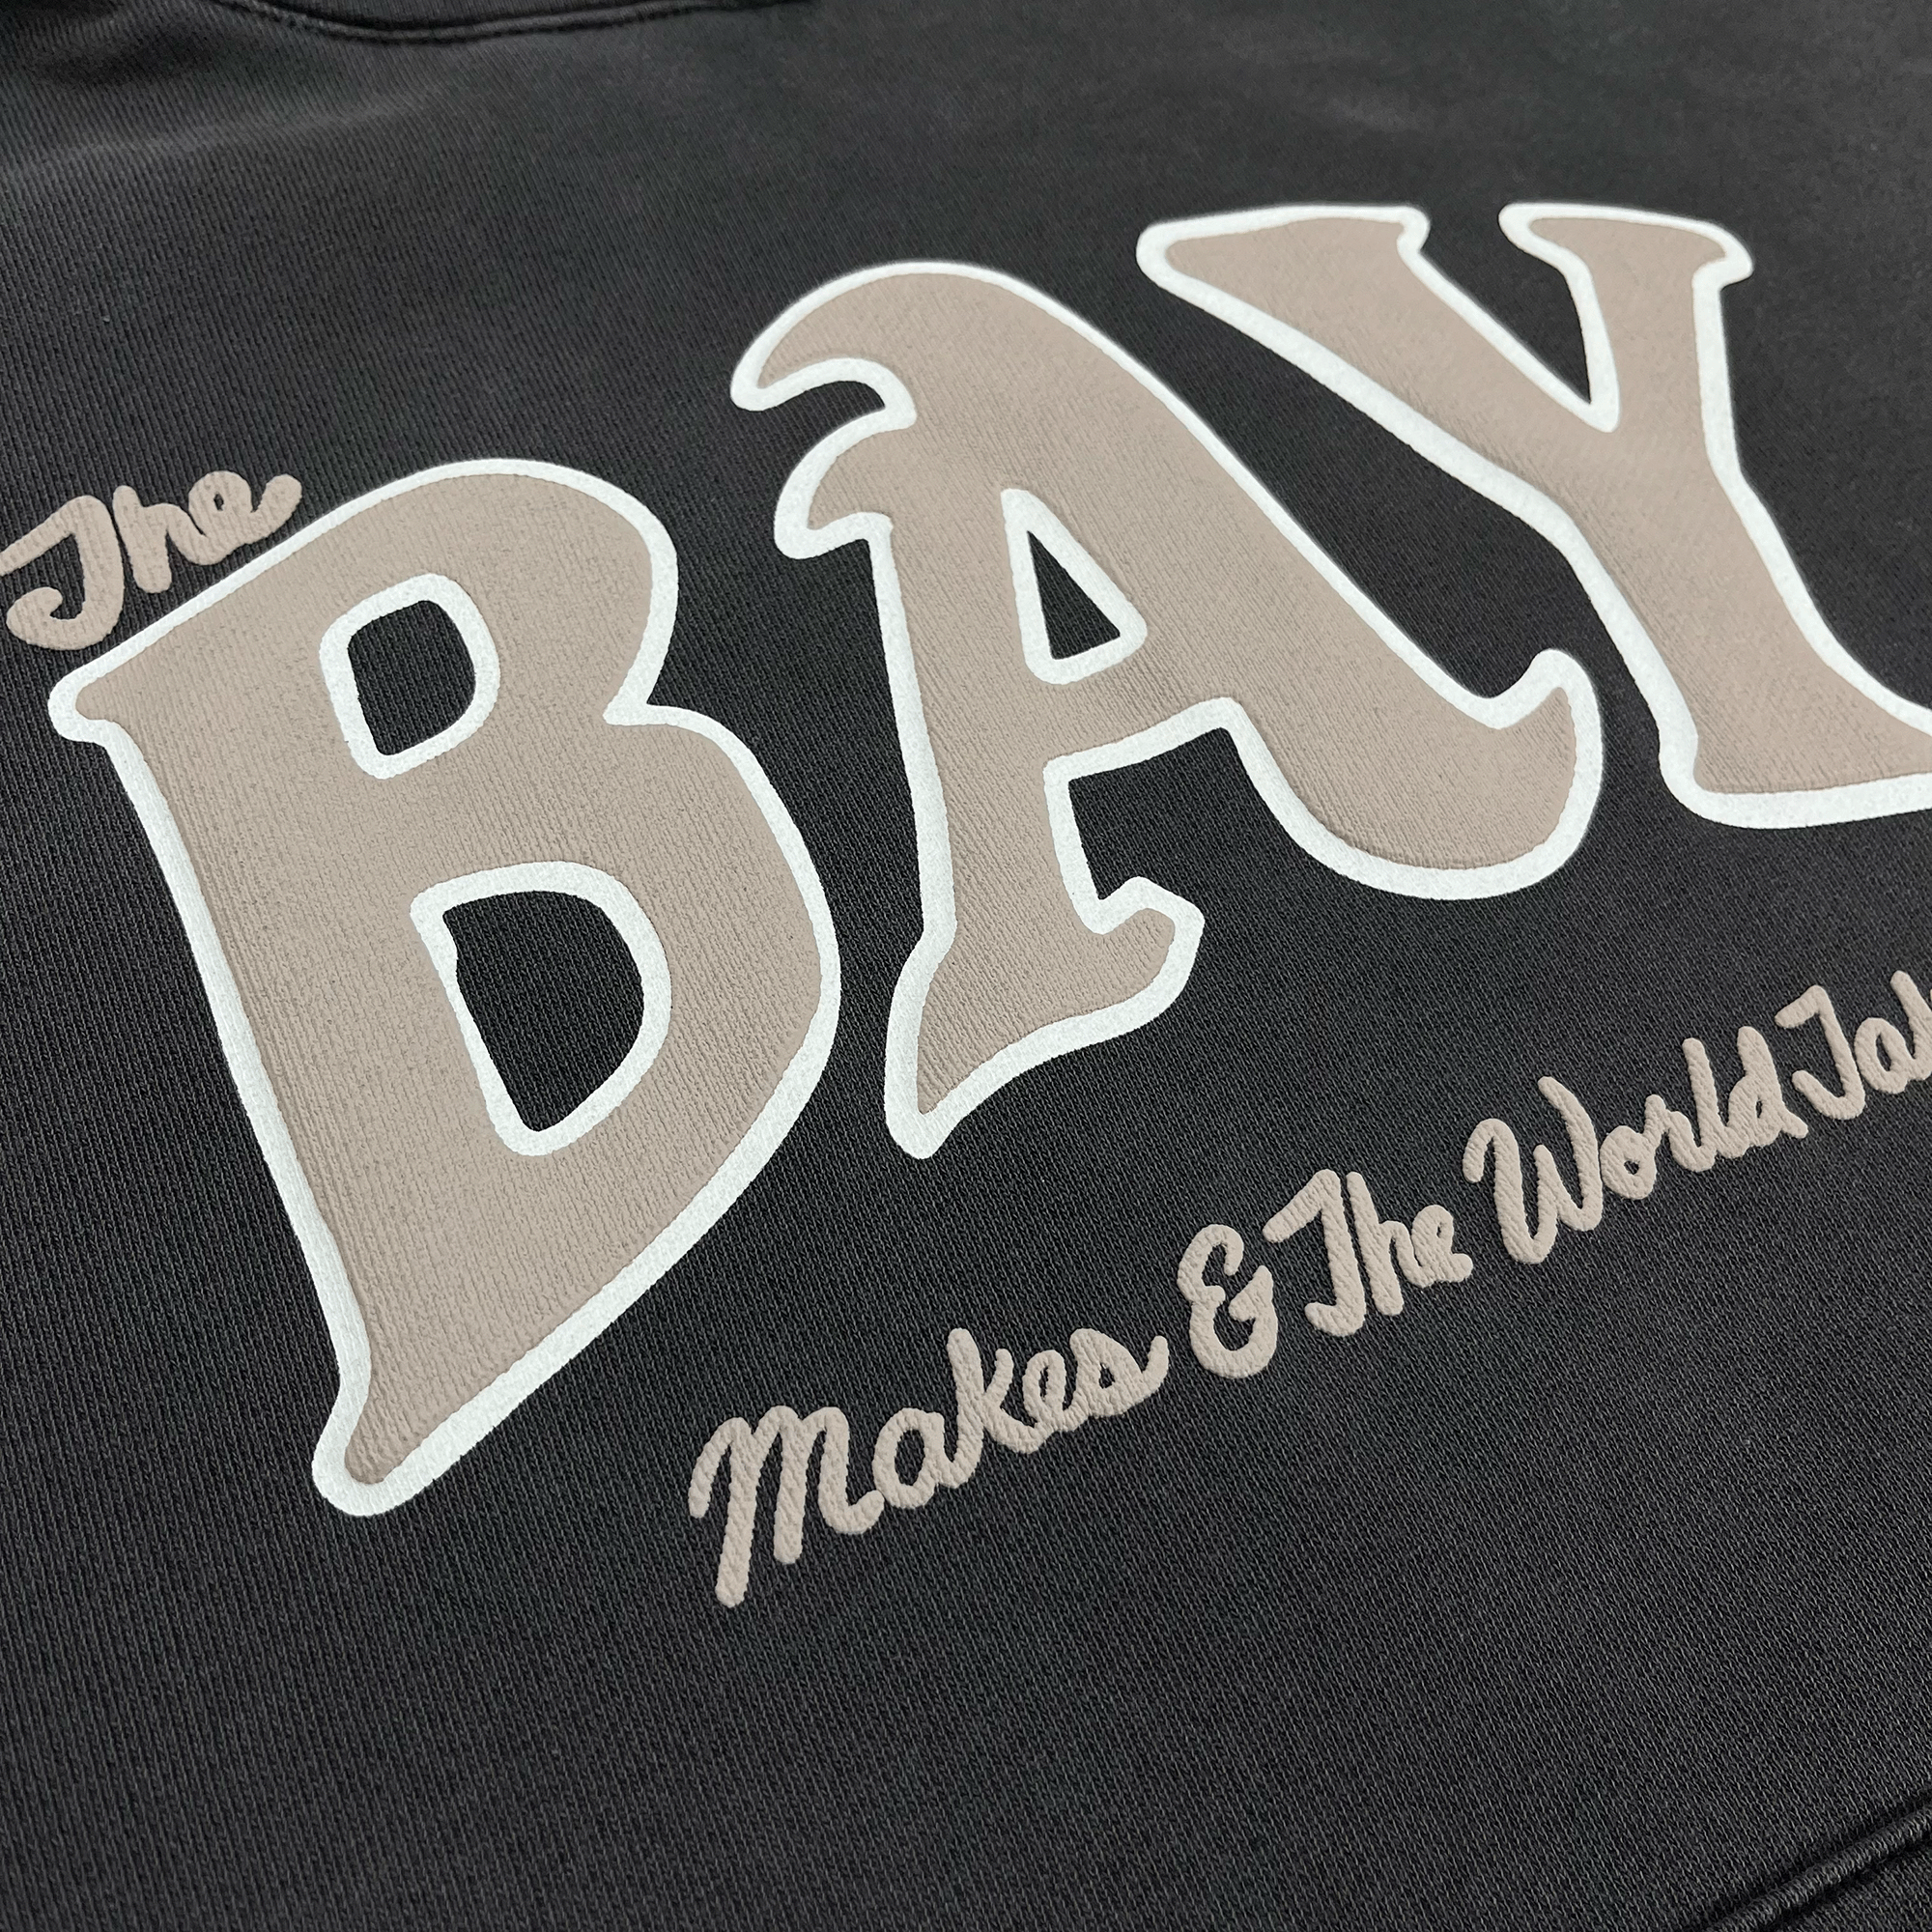 Close-up of tan and white The Bay Makes, The World Takes logo on the front chest of a pigment black hooded sweatshirt.